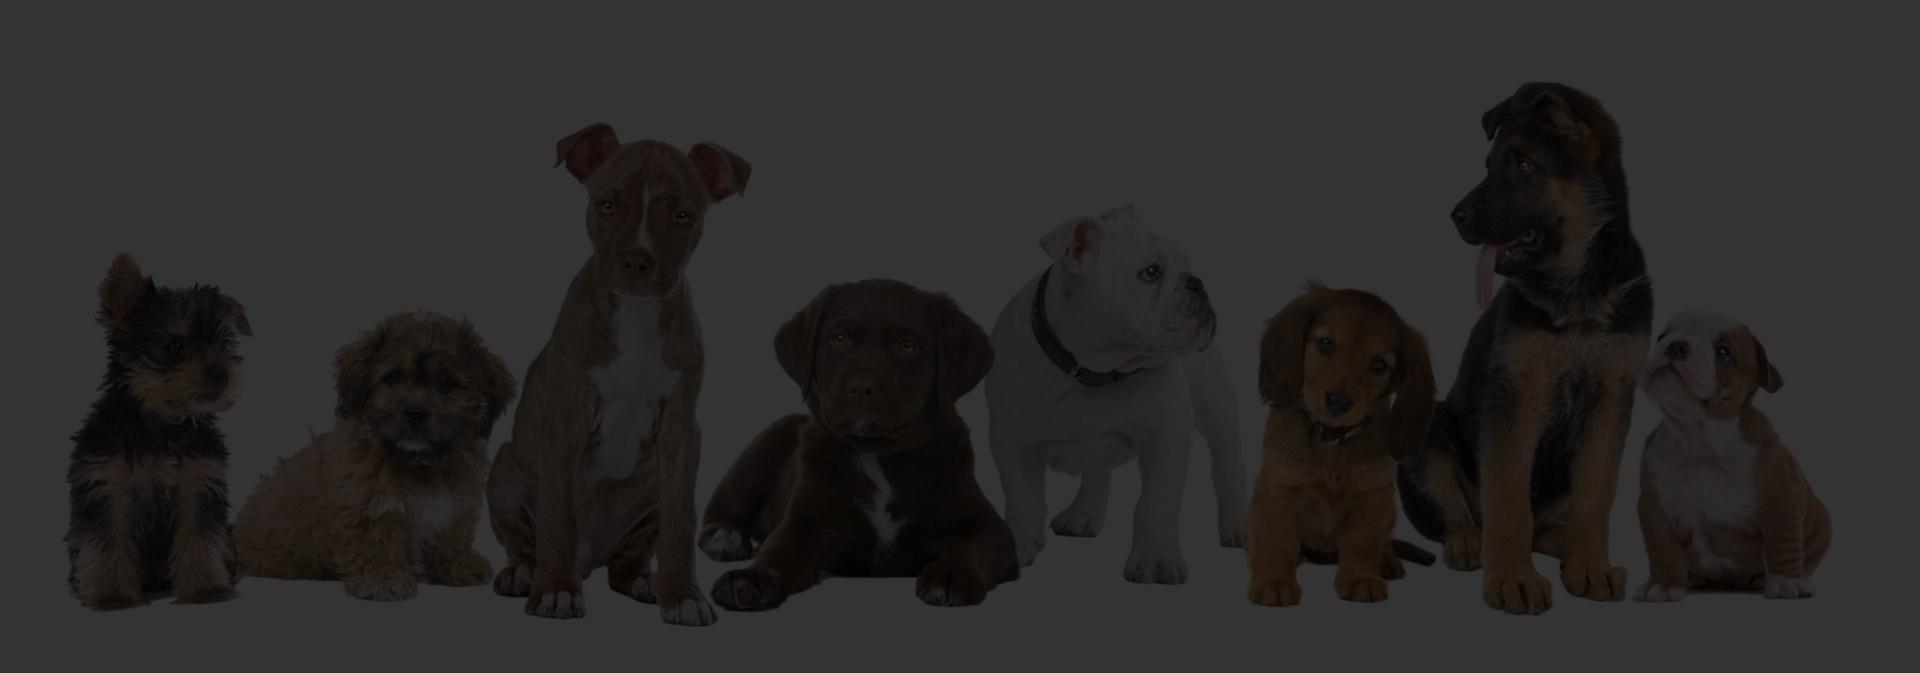 Row of puppies with a black overlay